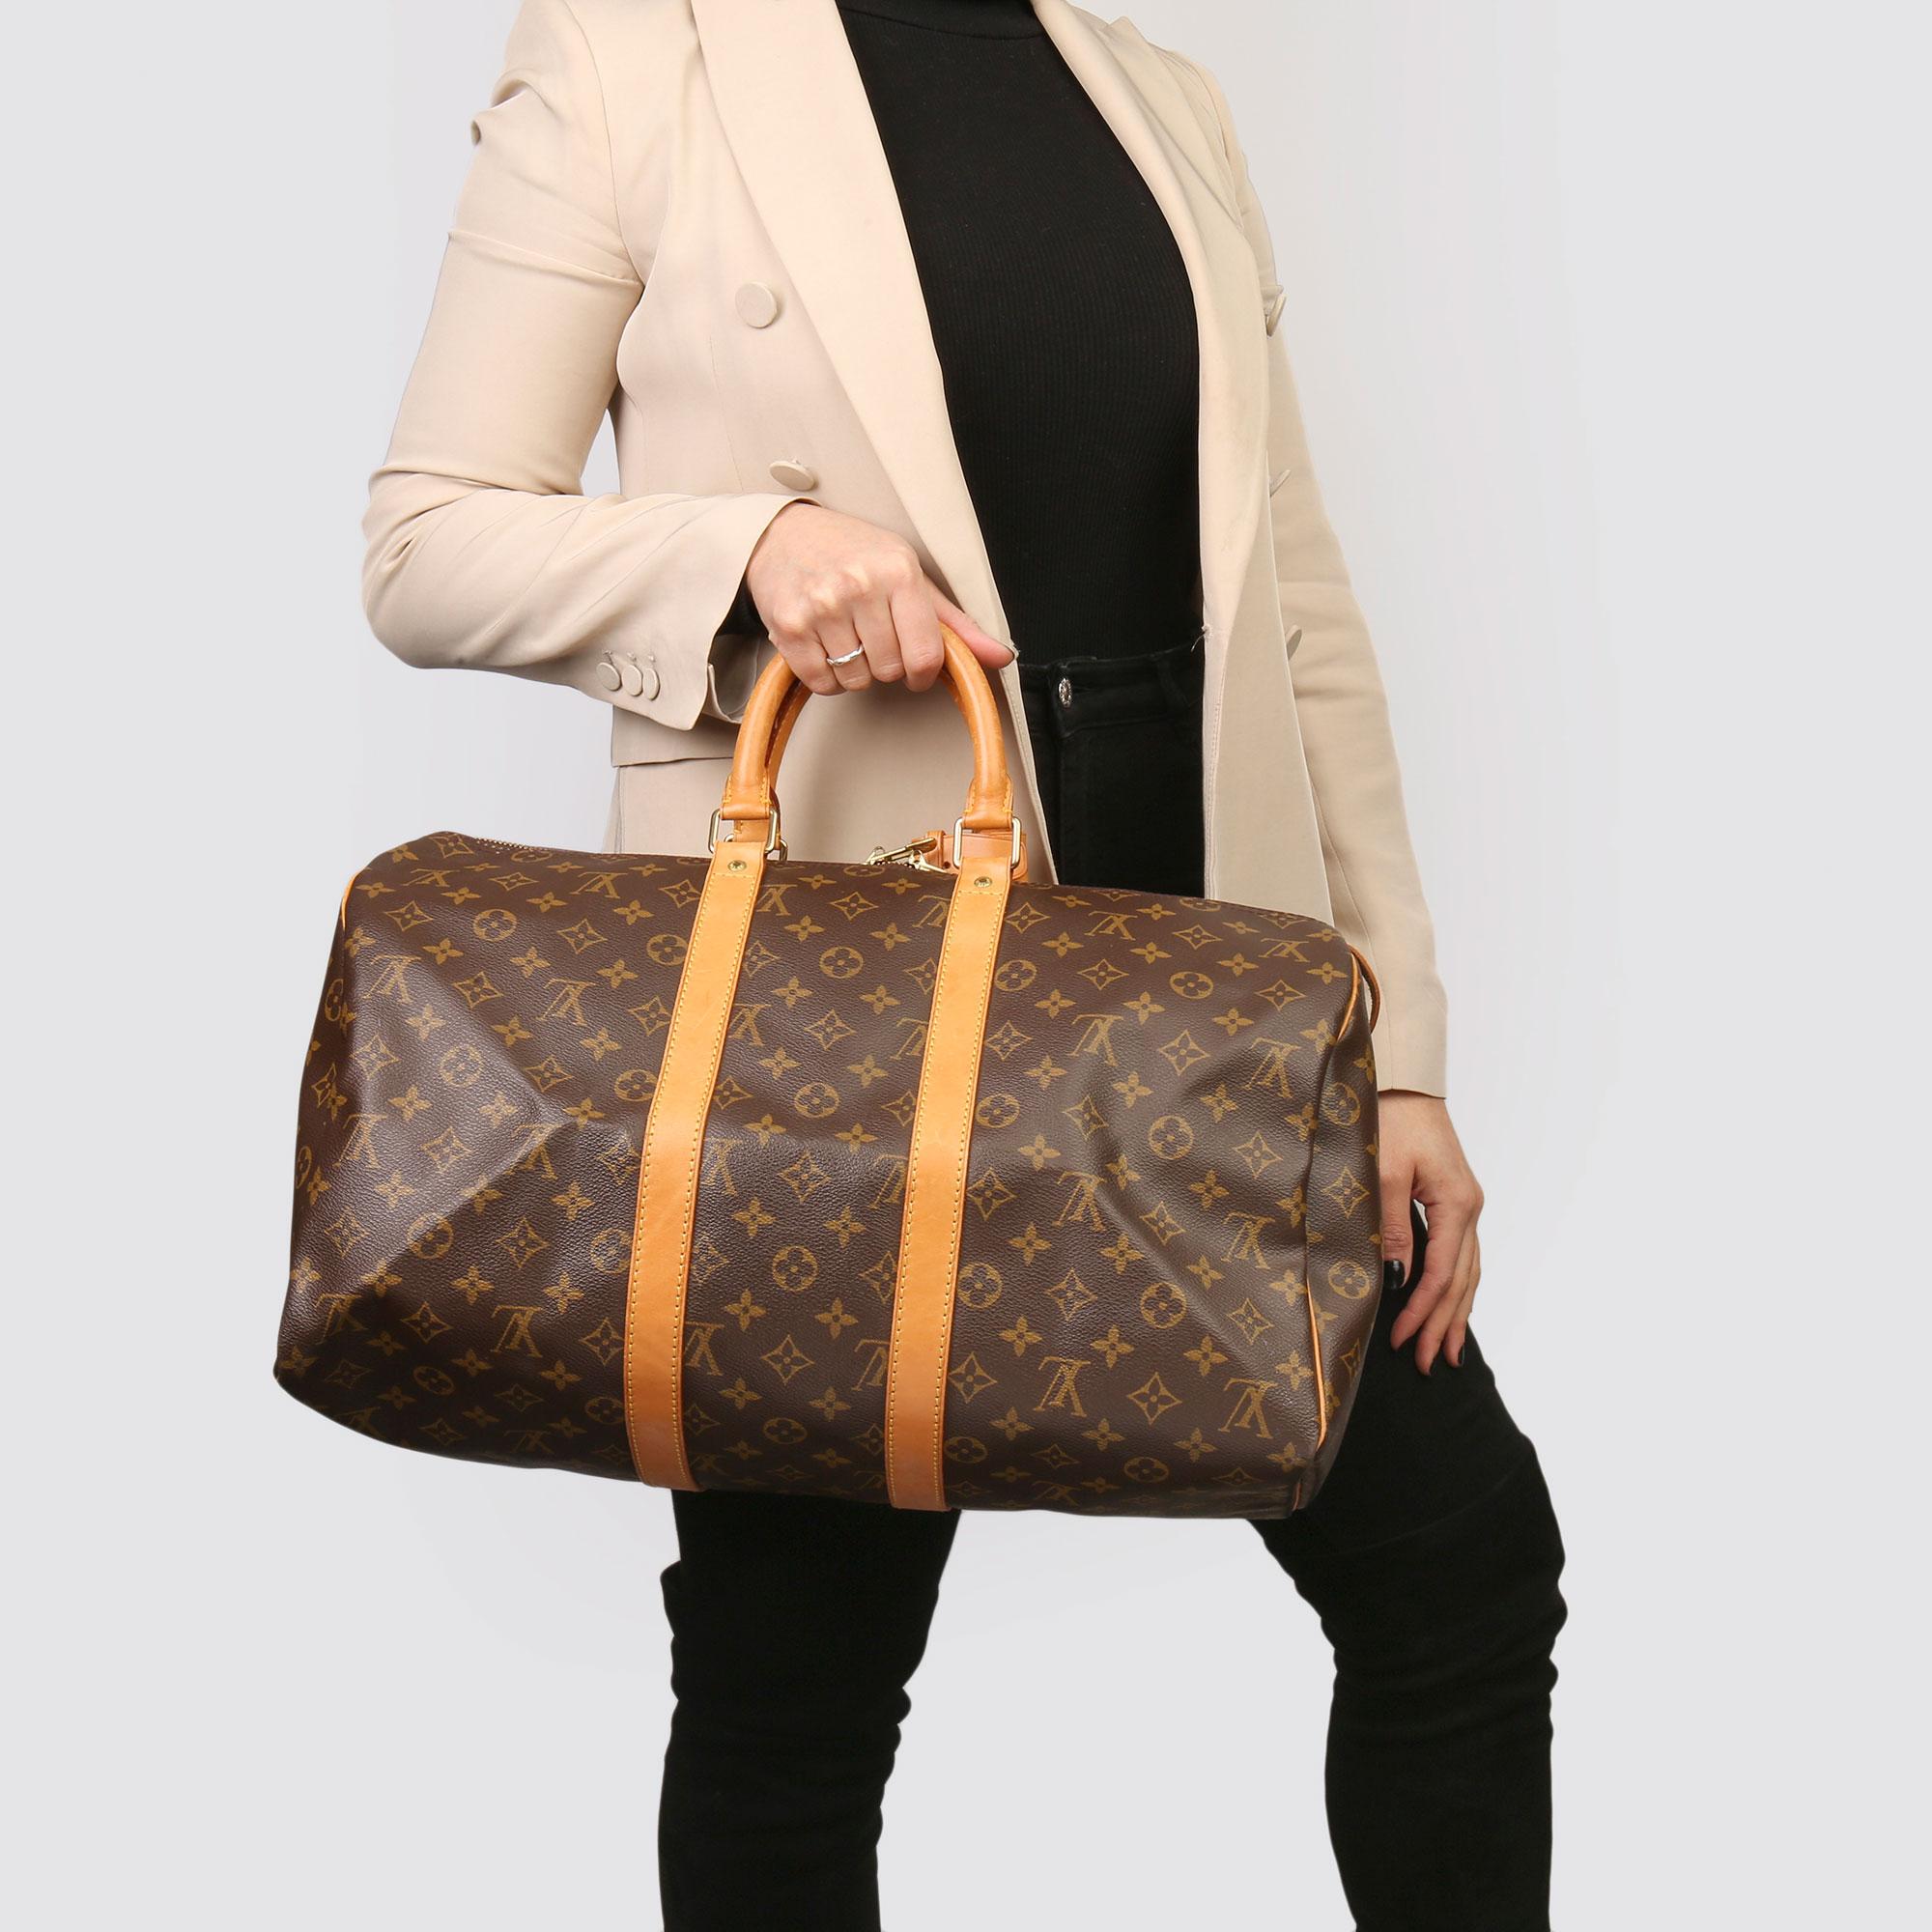 LOUIS VUITTON
Brown Monogram Coated Canvas & Vachetta Leather Vintage Keepall 45

Xupes Reference: HB3732
Serial Number: SP1904
Age (Circa): 1994
Accompanied By: Luggage Tag, Handle Keeper, Padlock, Keys 
Authenticity Details: Date Stamp (Made in